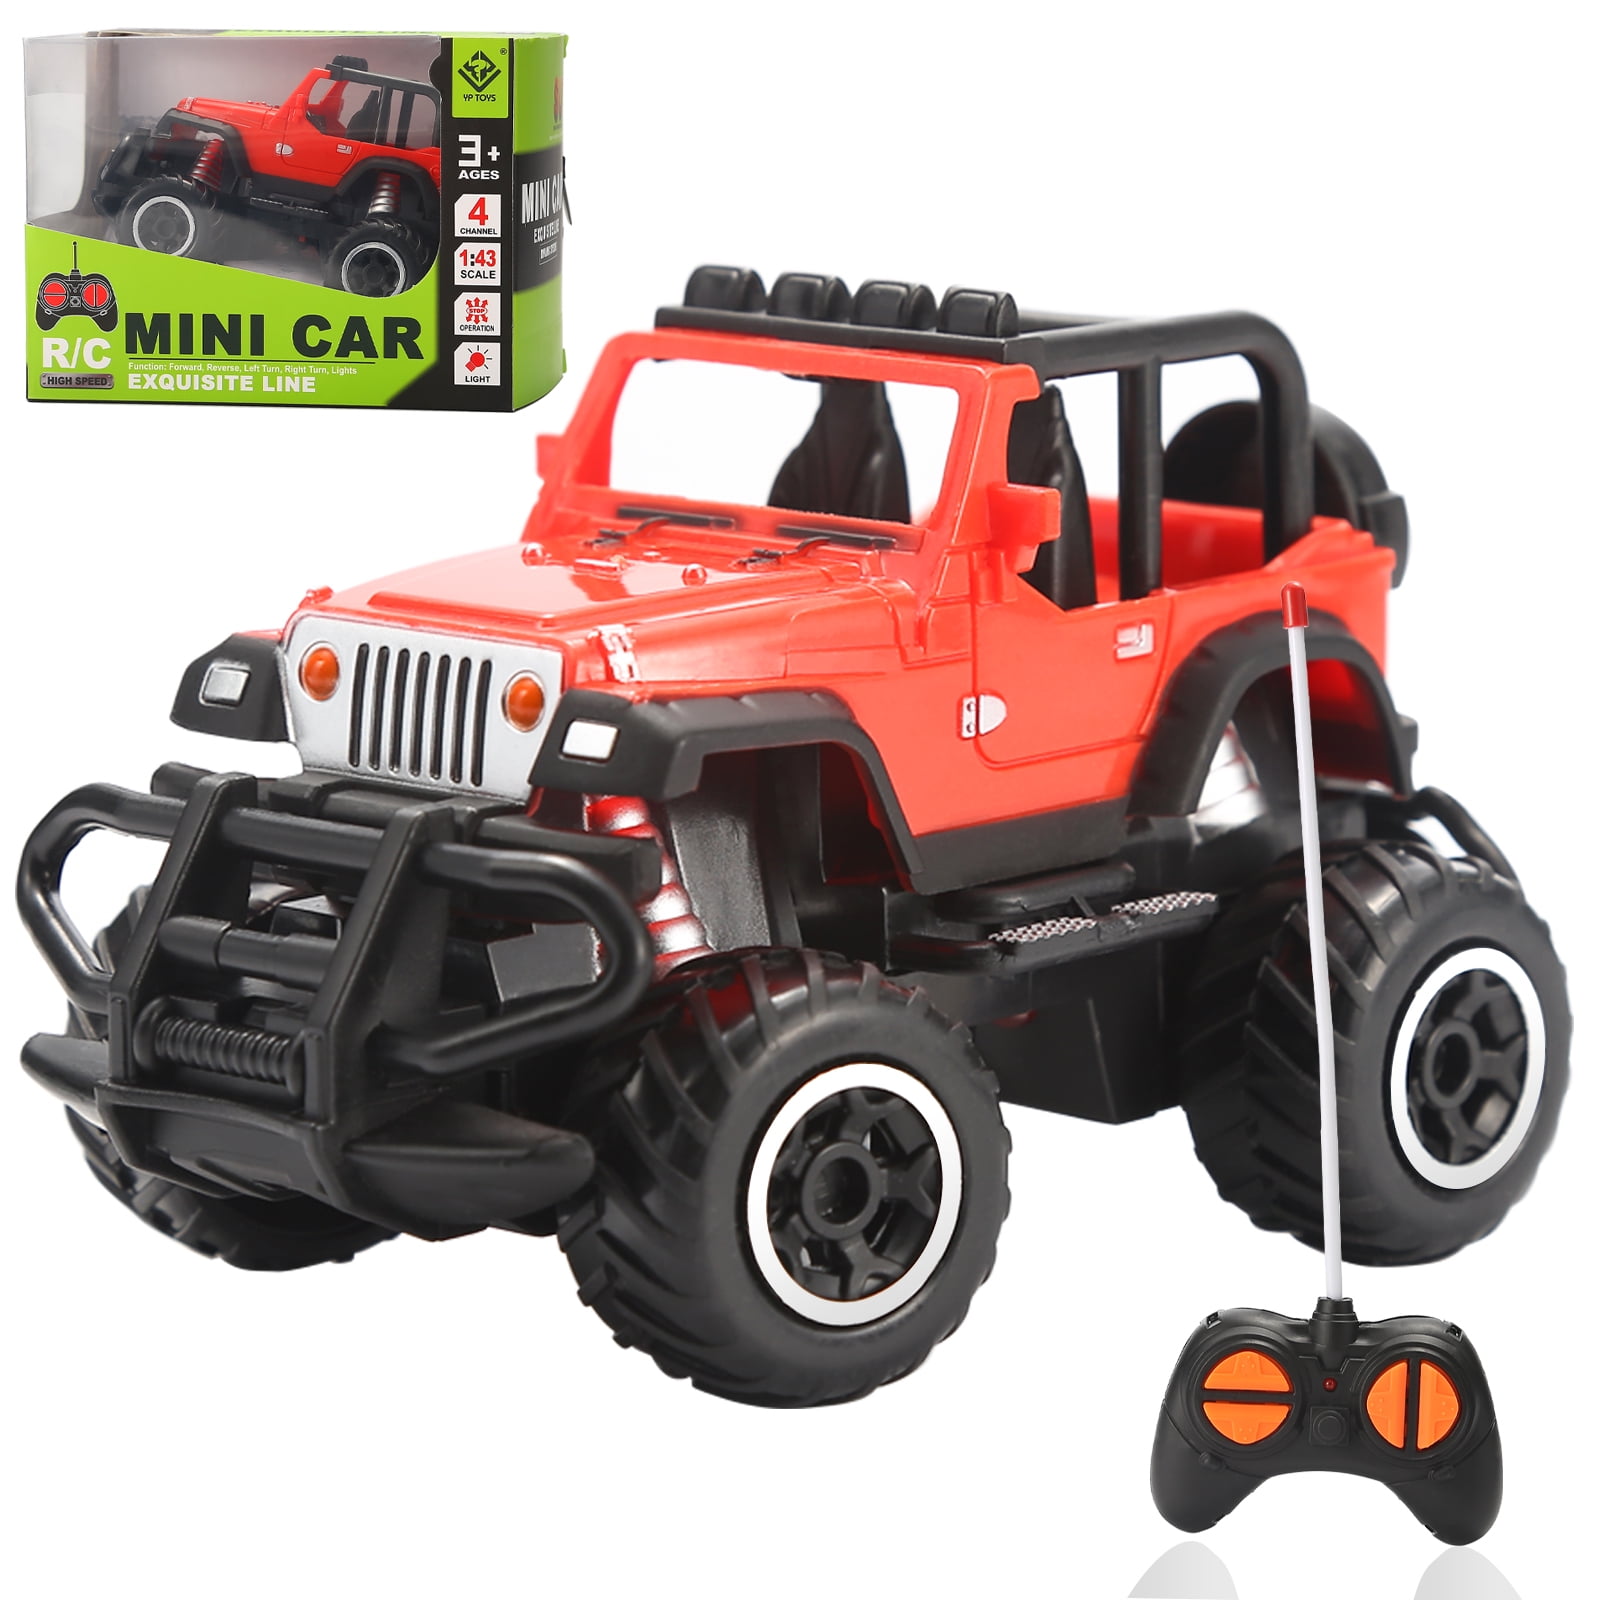 1:43 Mini RC Car Truck Off-Road High-Speed Racing Vehicle Kid Toy Christmas Gift 